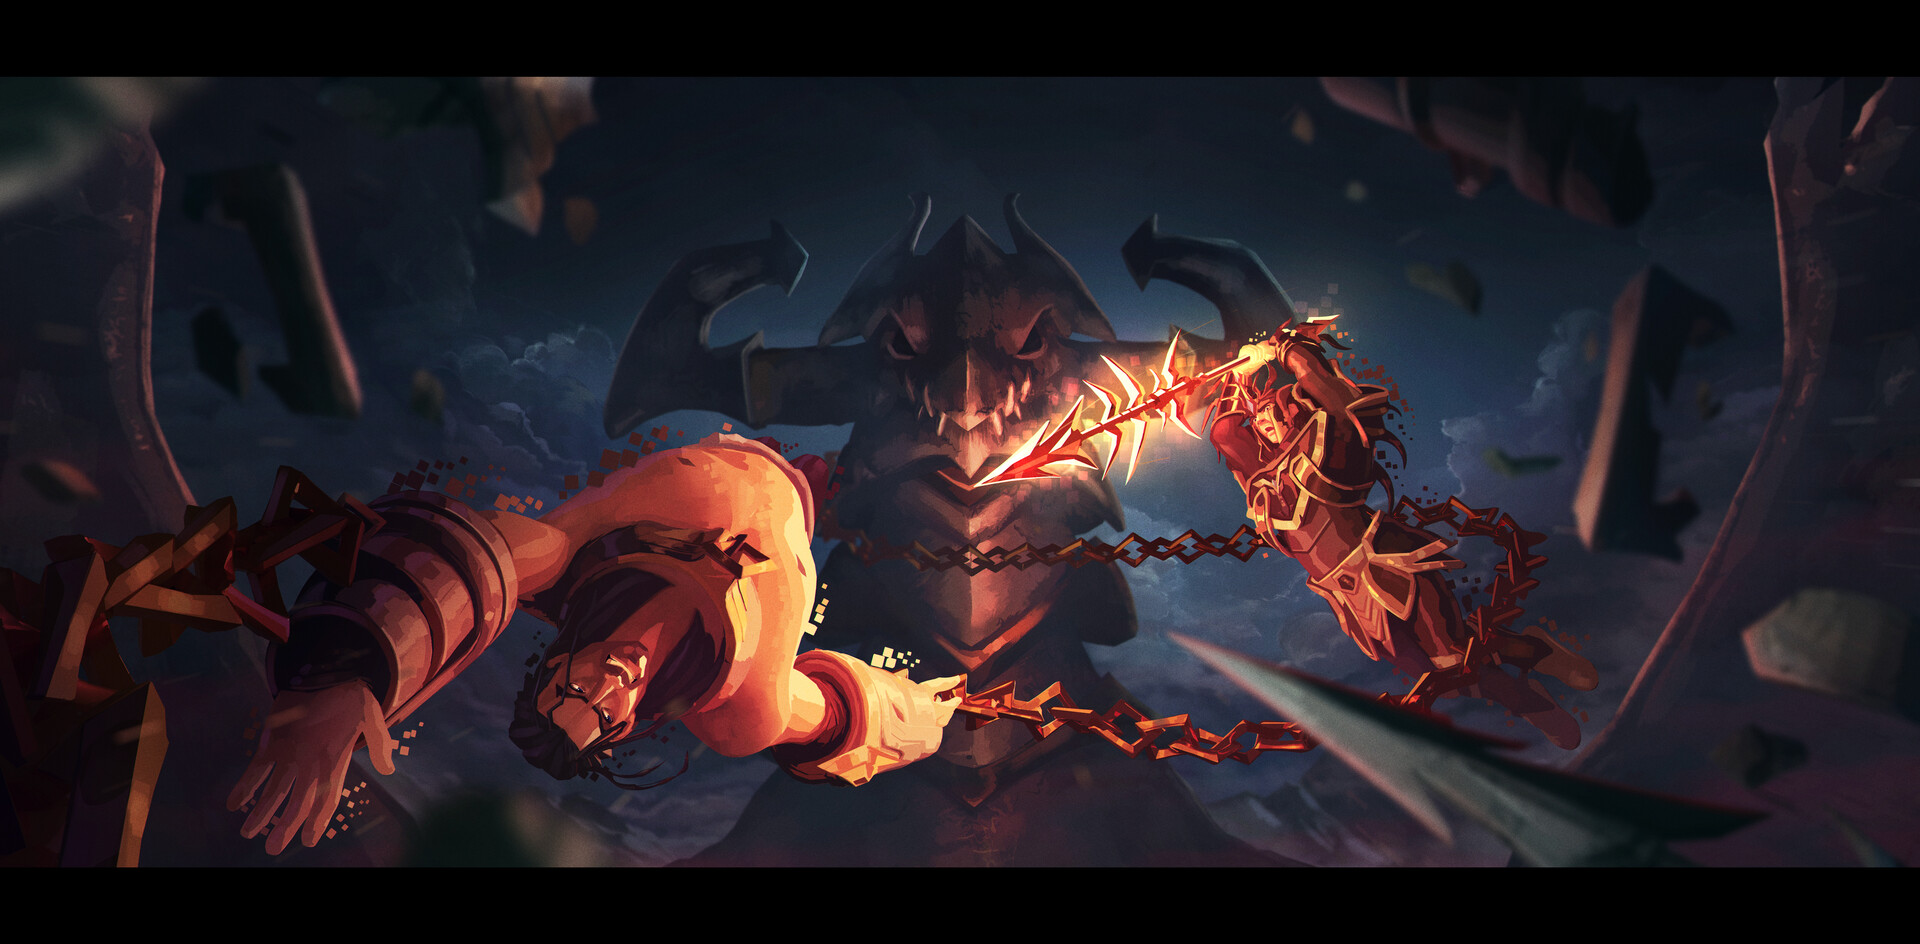 Video Game The Mageseeker: A League of Legends Story HD Wallpaper